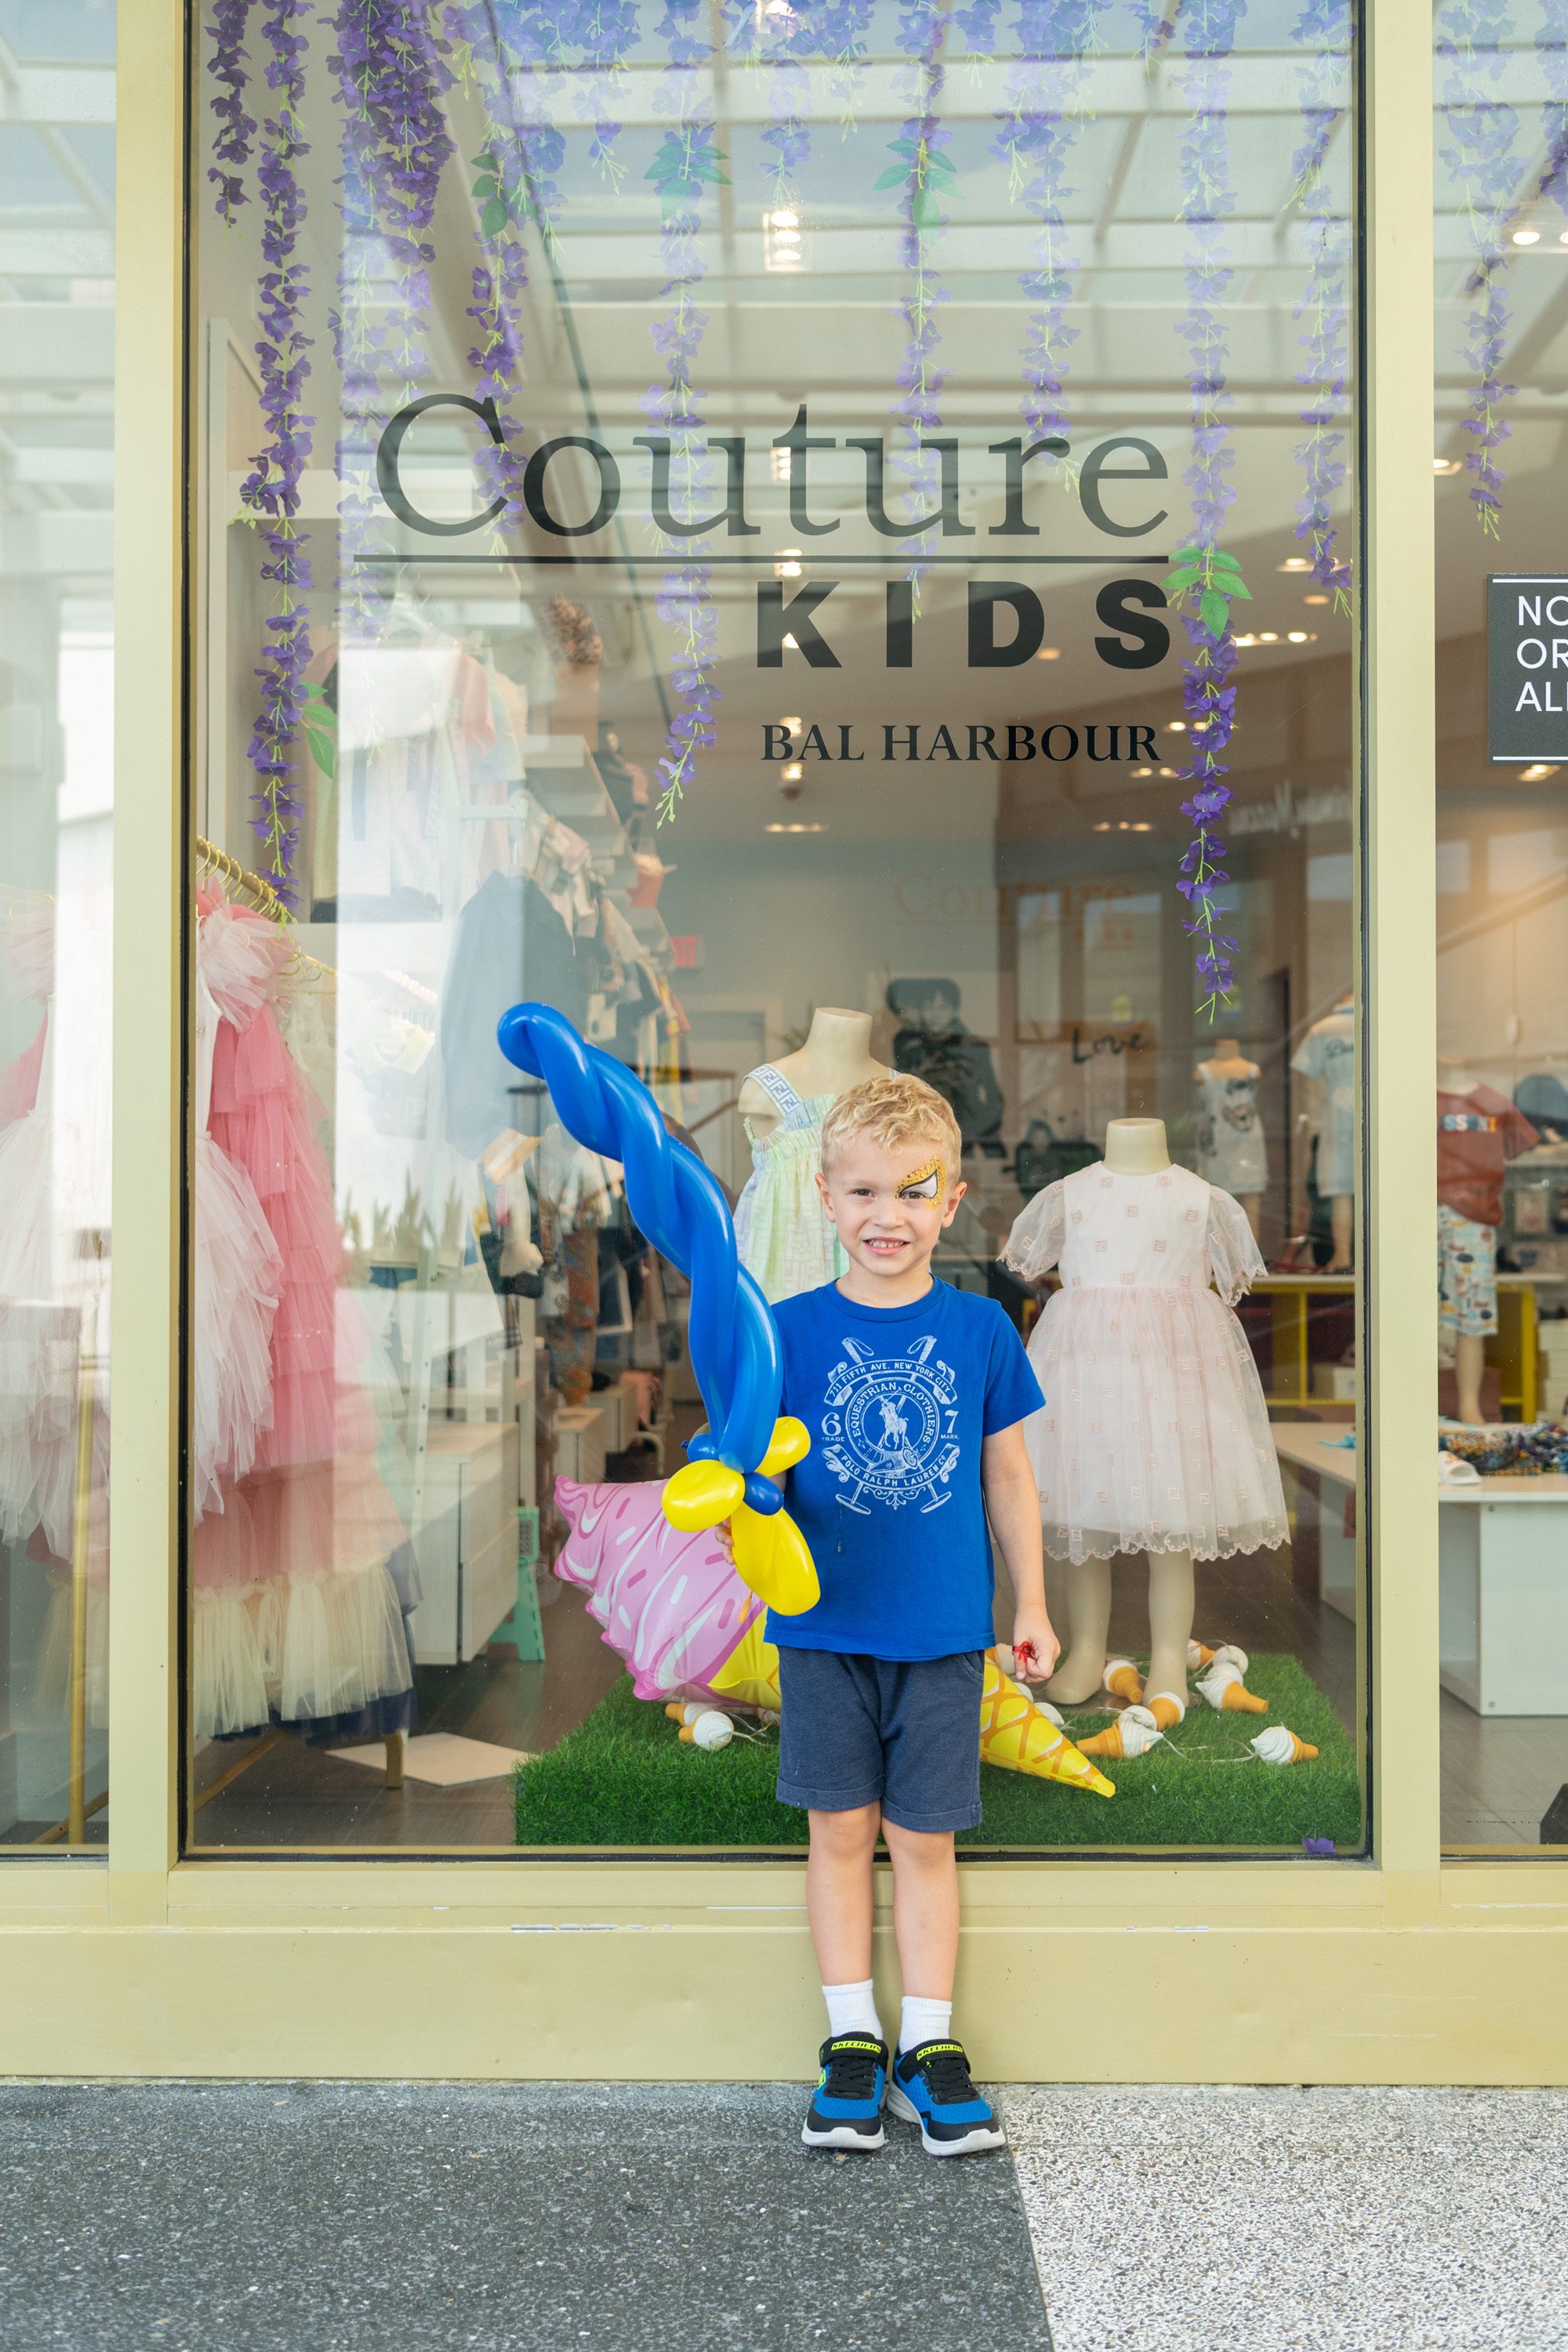 Children enjoyed custom balloon creations by Couture Kids